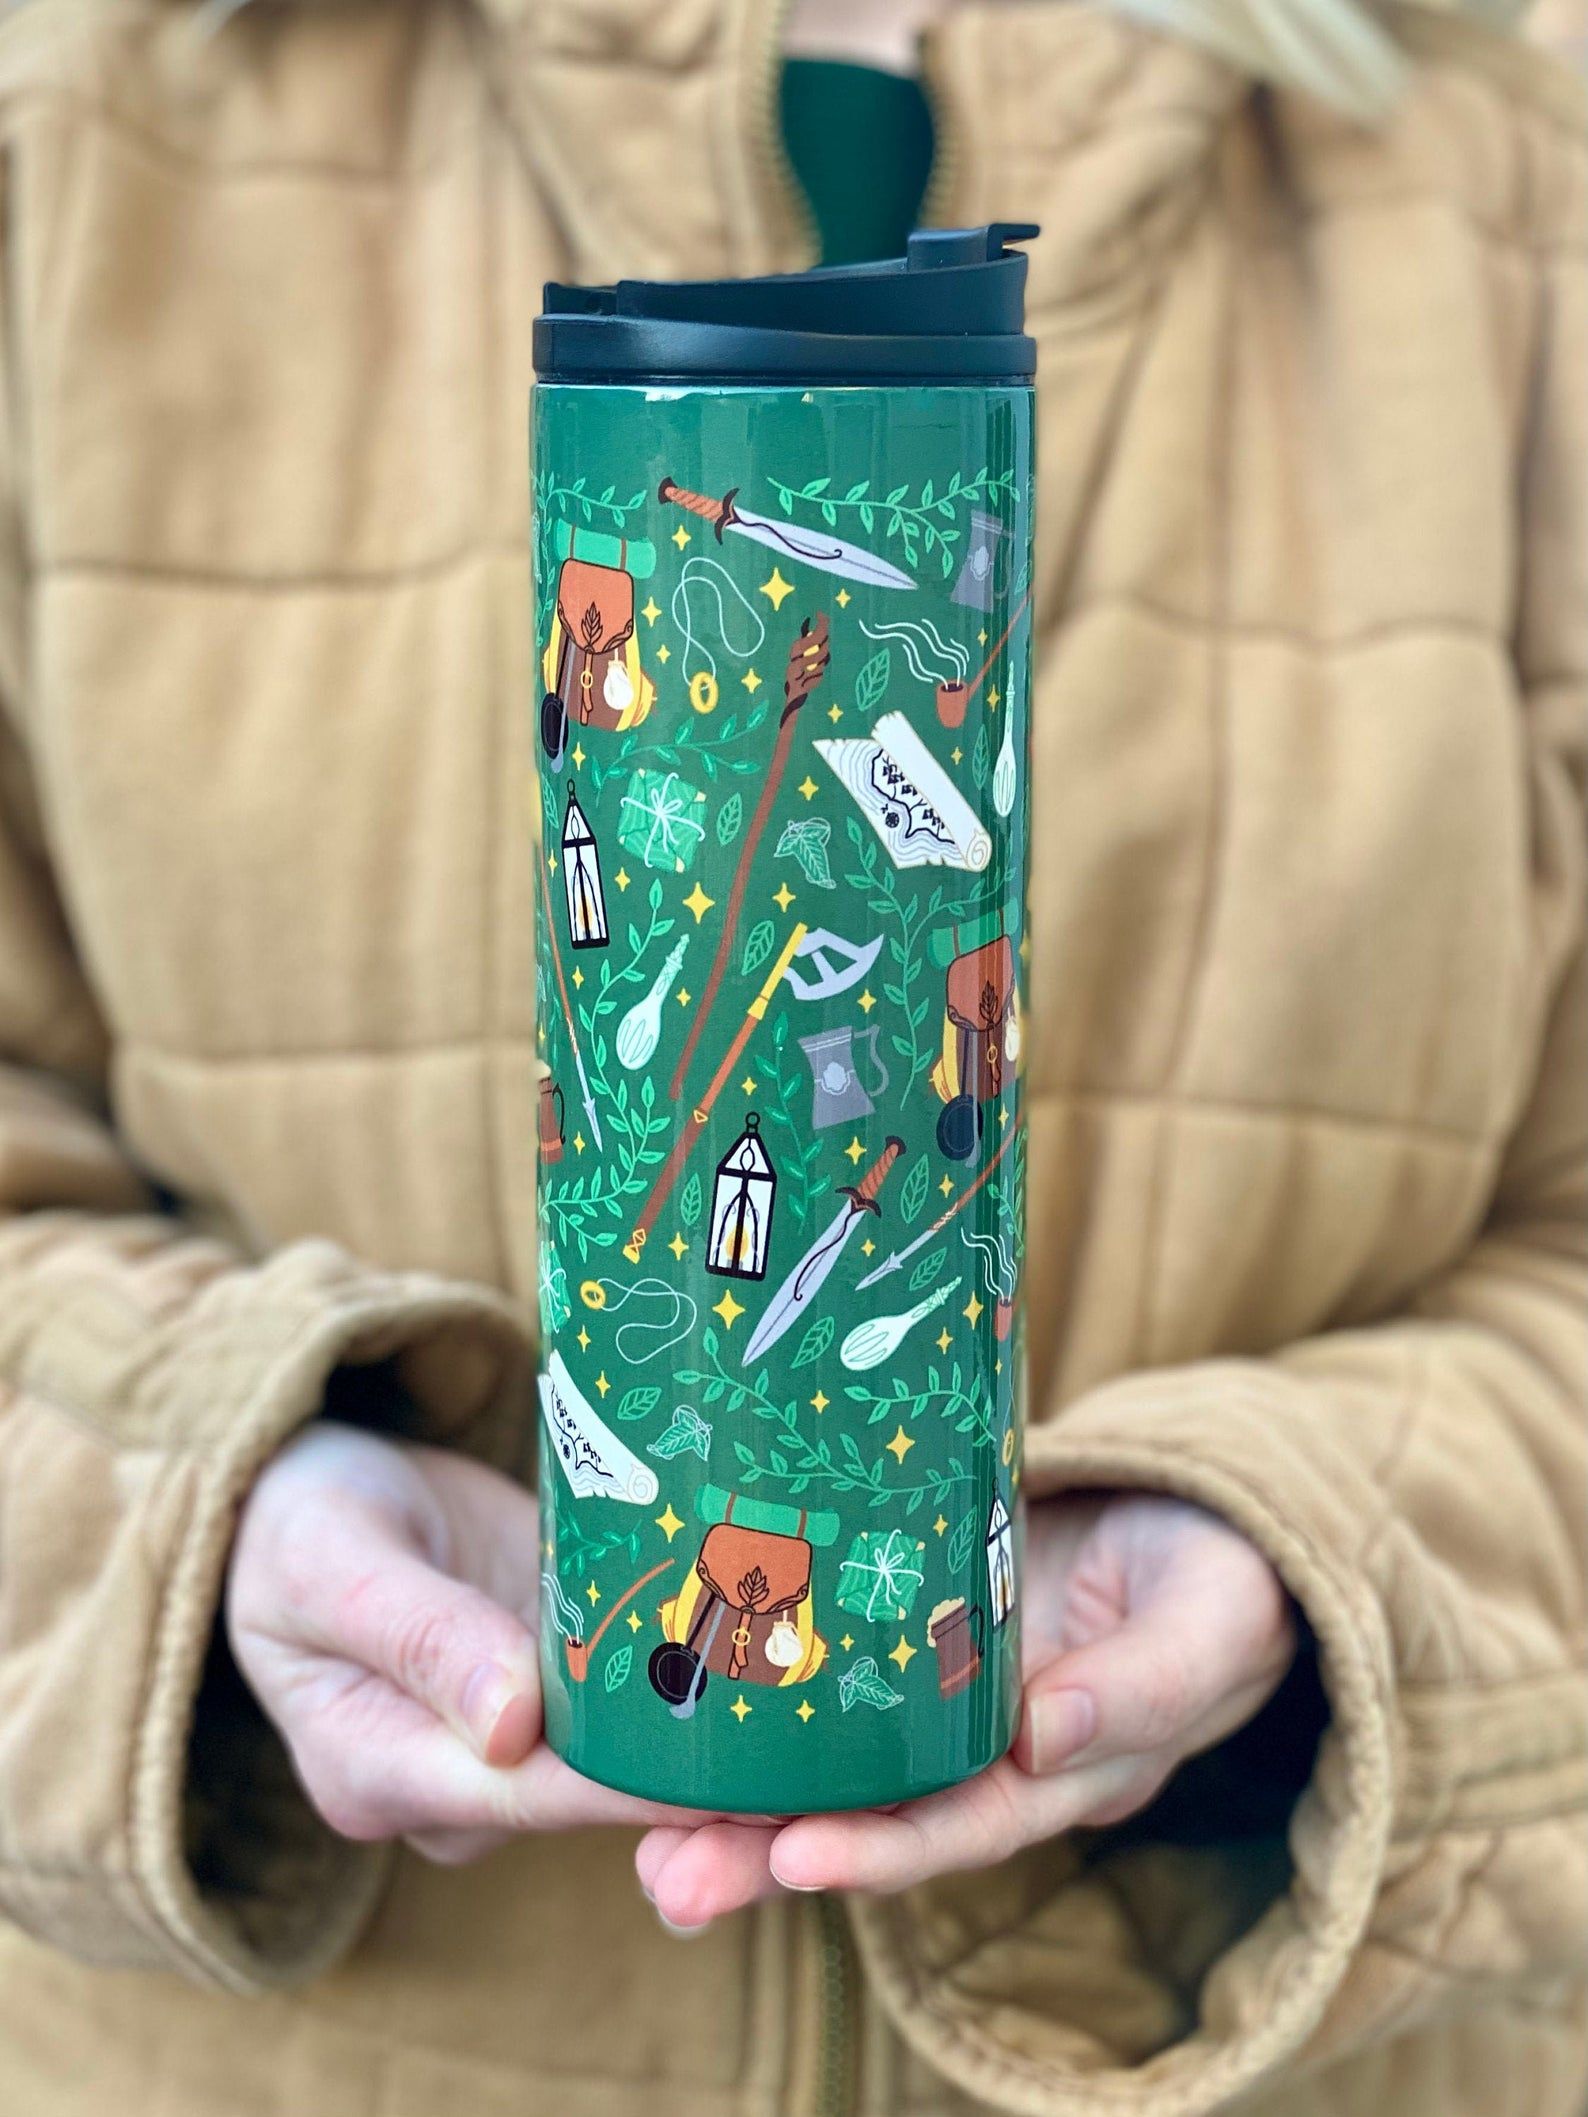 A person holding a tumble in their hands. The tumbler is green with a pattern of leaves, swords, backbacks, and weapons. 